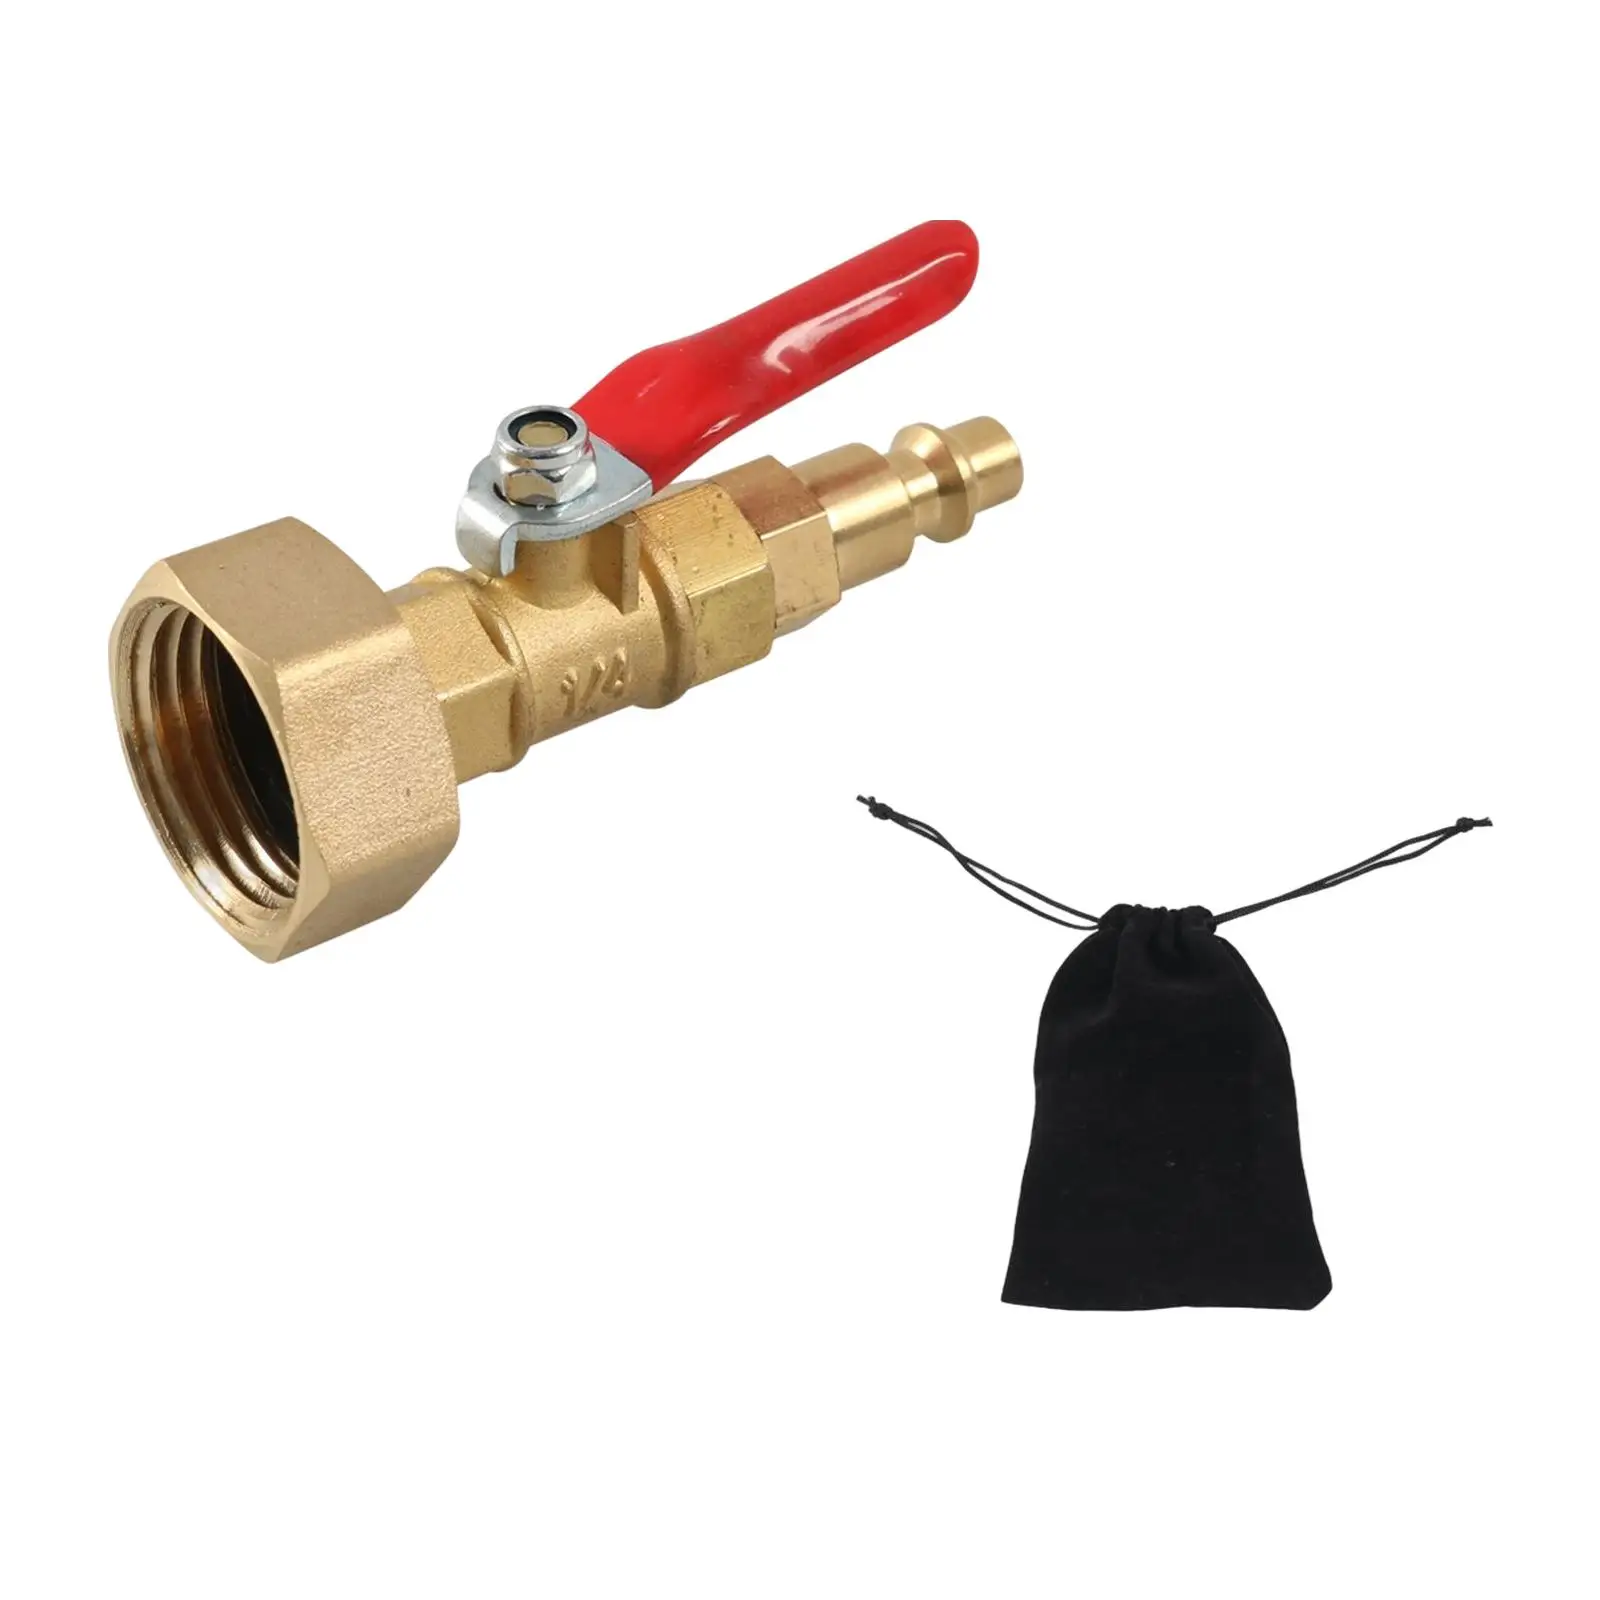 Brass Winterize Adapter Fit for RV Blowing Out Water Winterize Water Lines